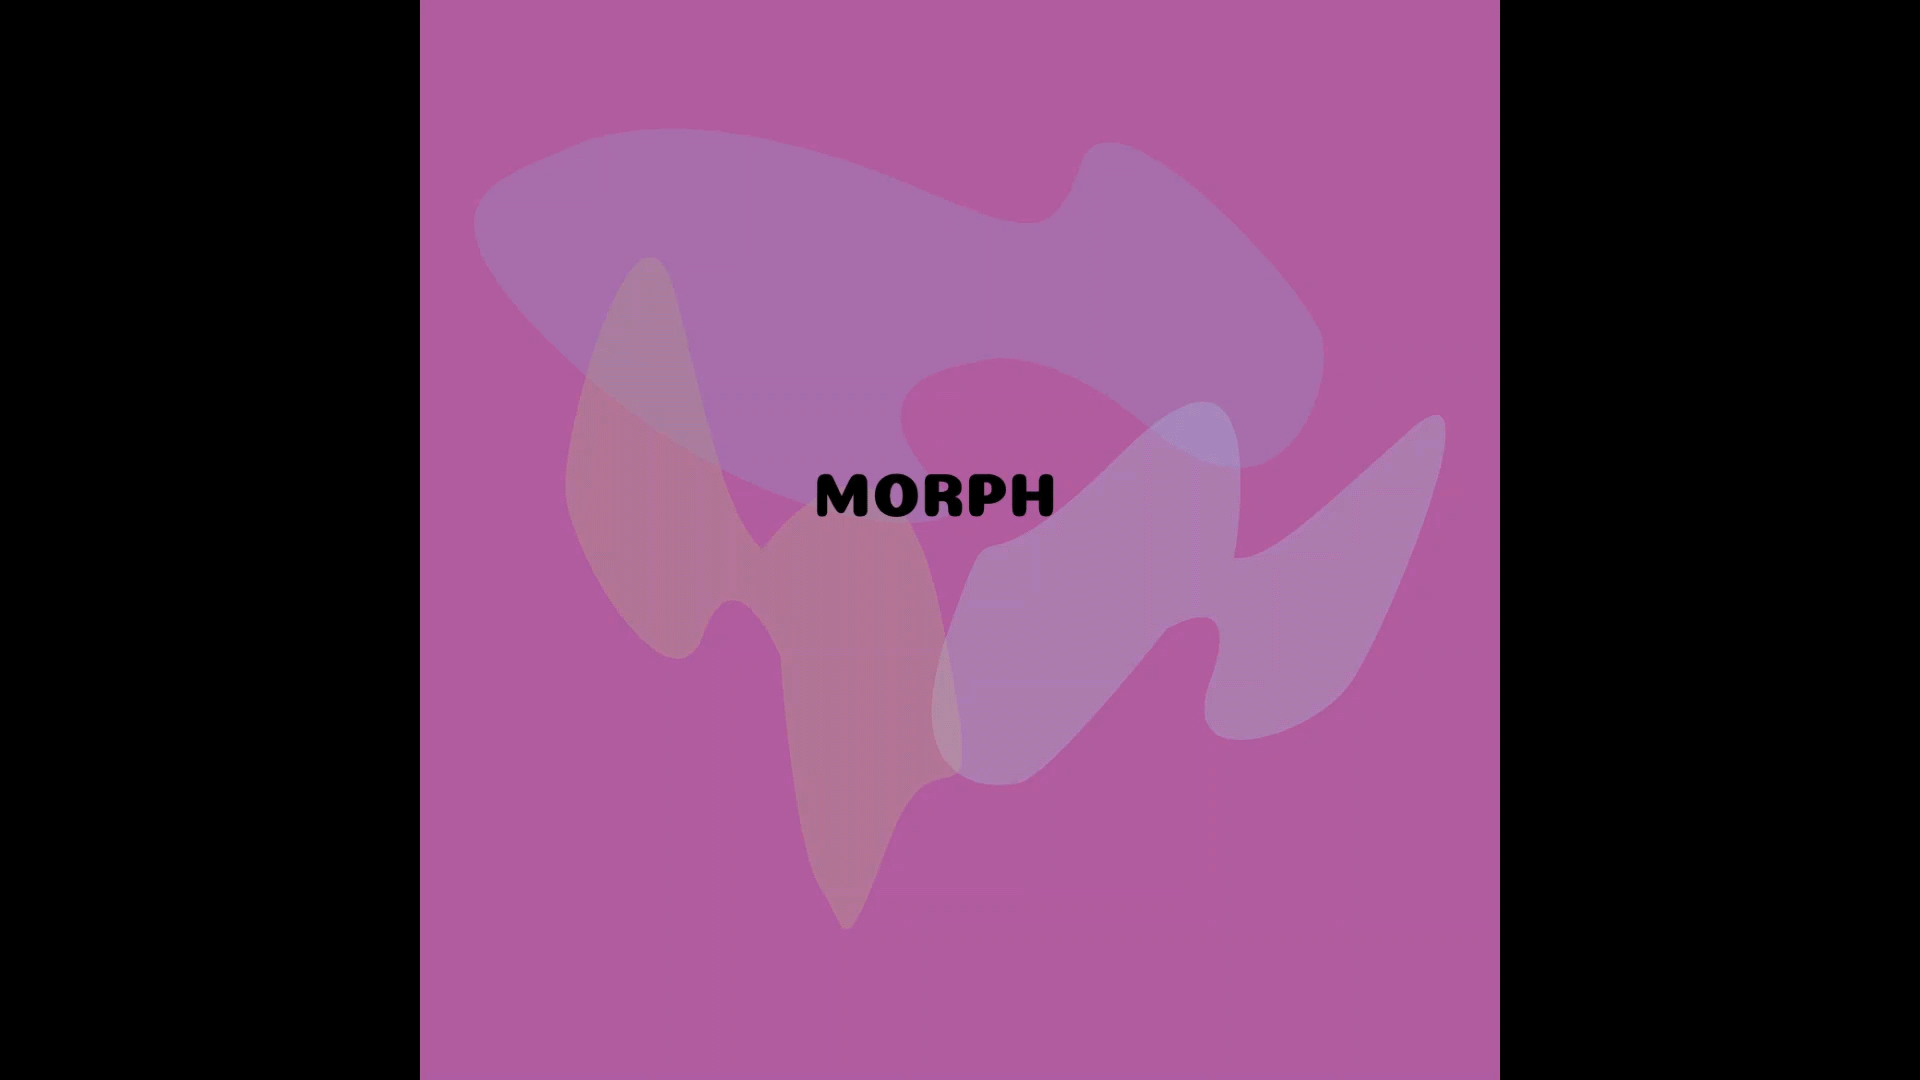 MORPHING thoughts